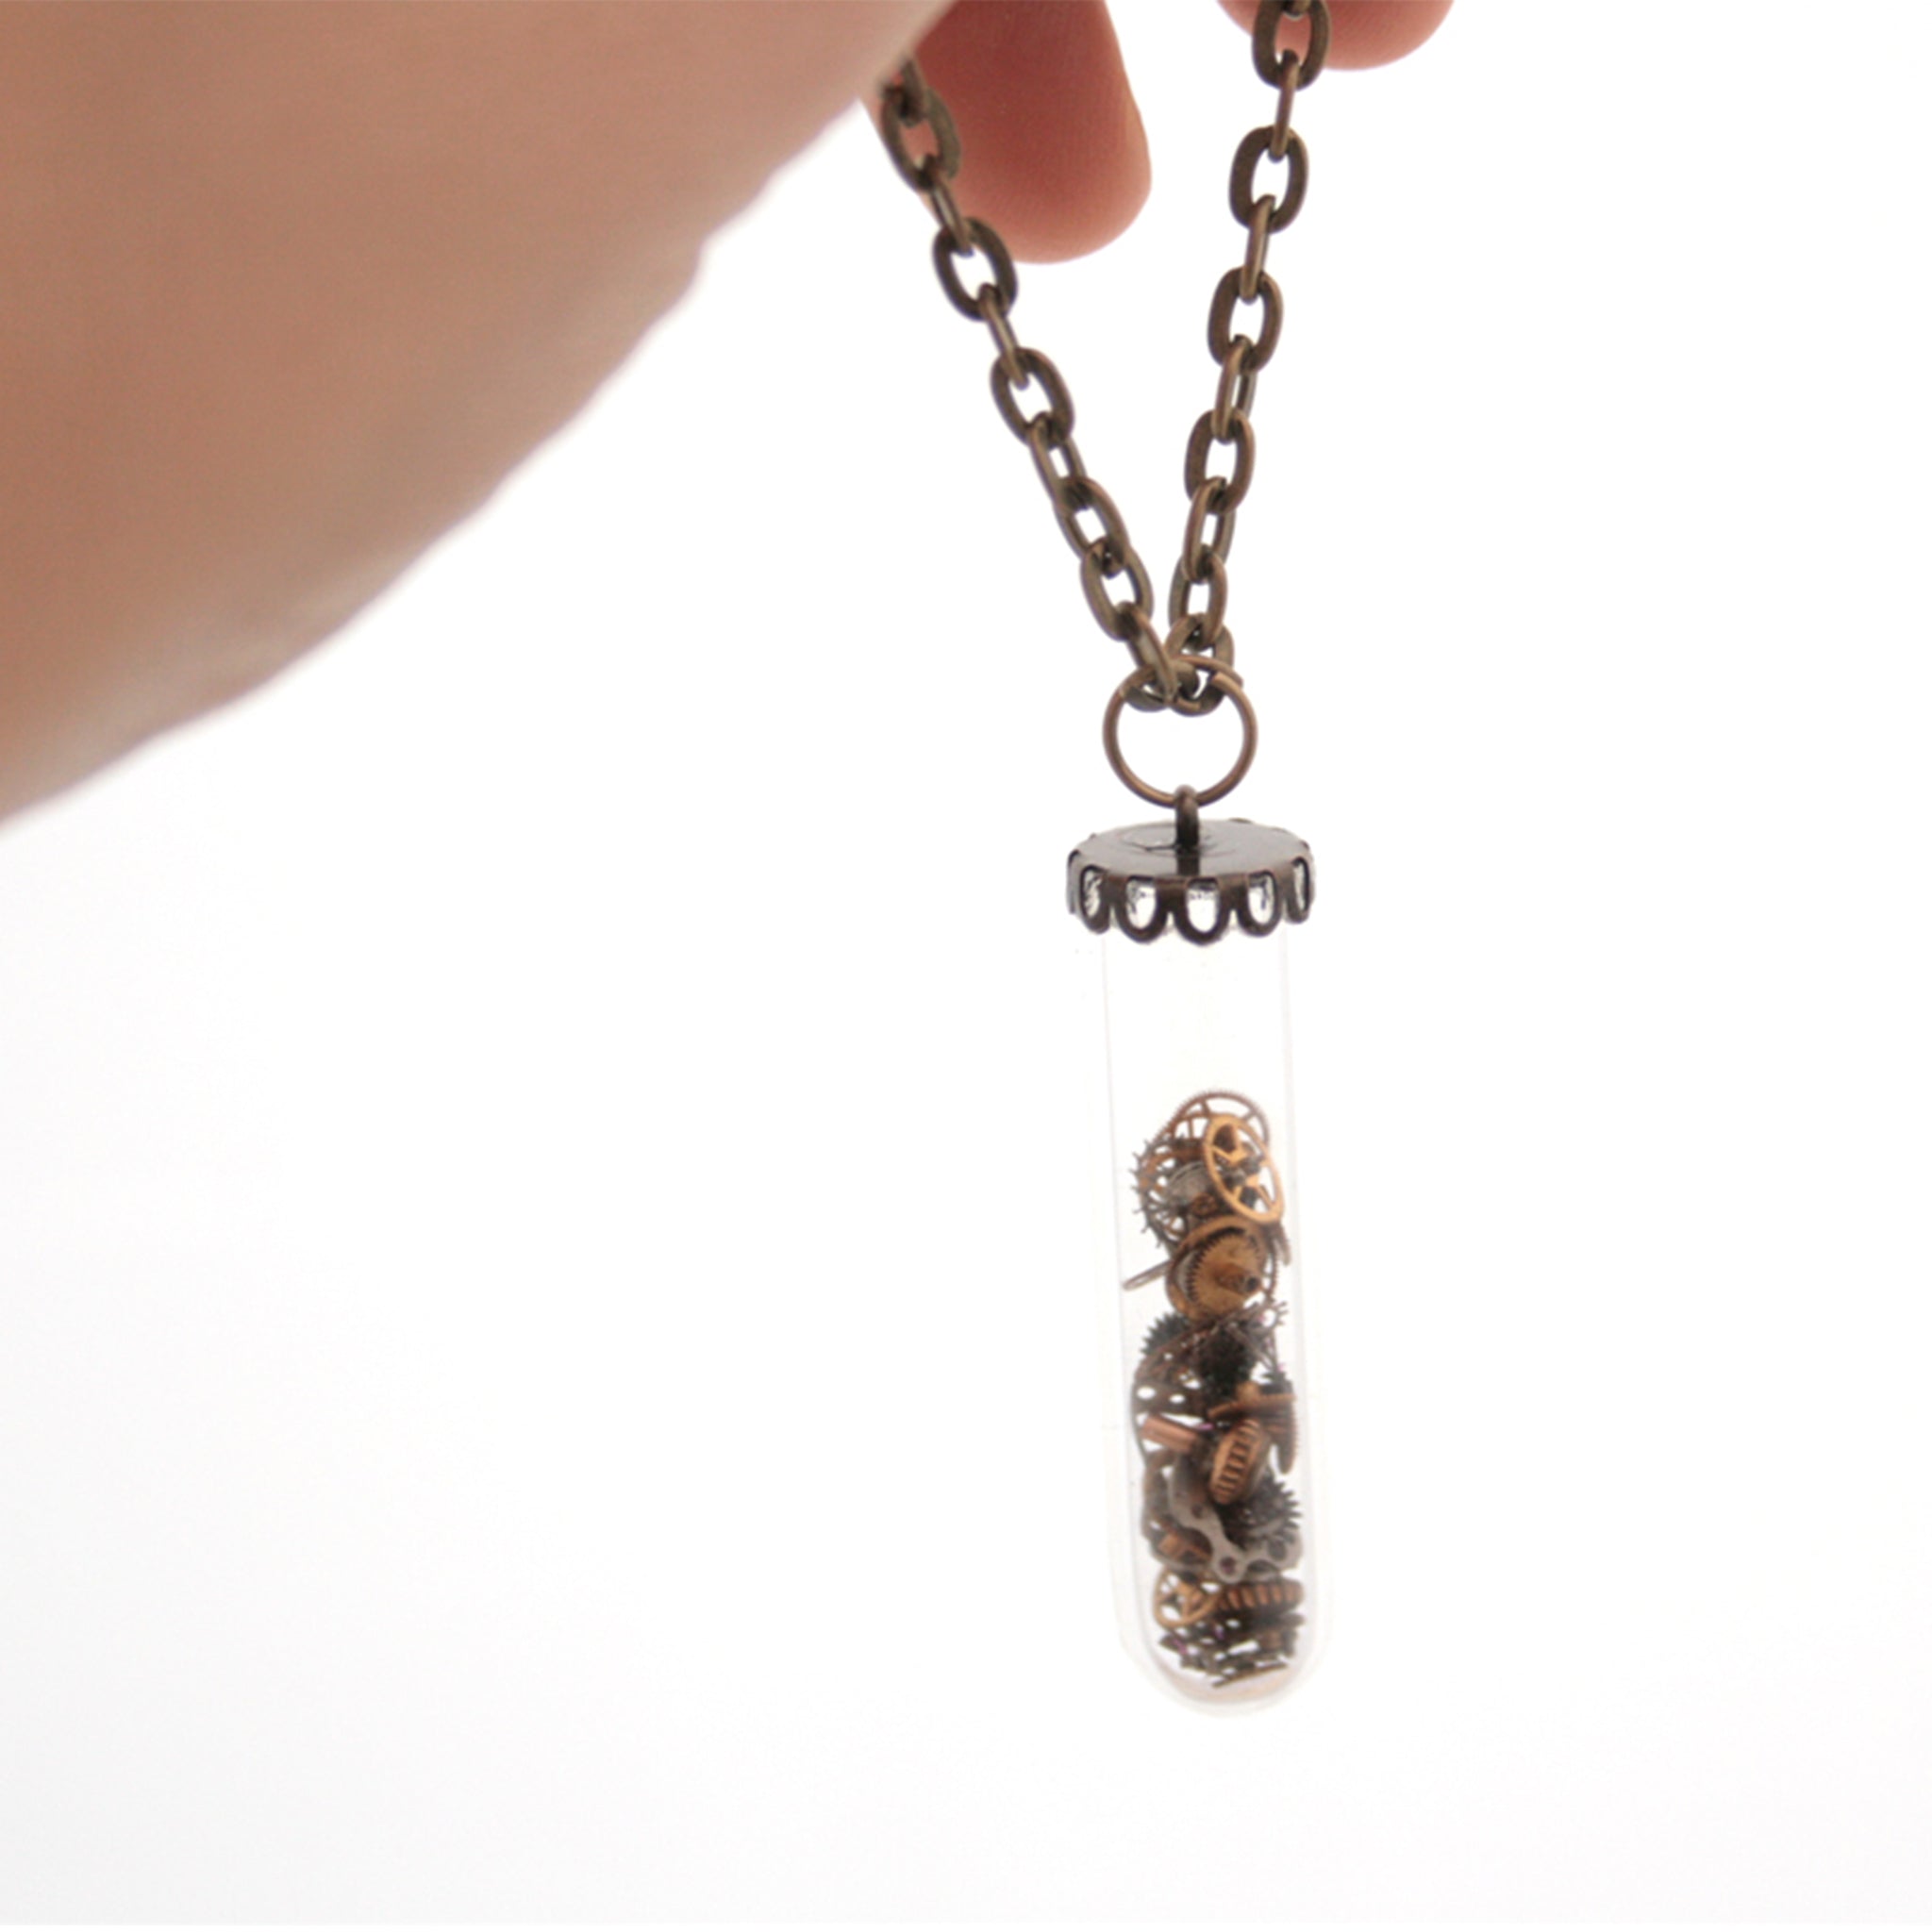 steampunk terrarium pendant necklace made of glass in vial shape filled with watch parts